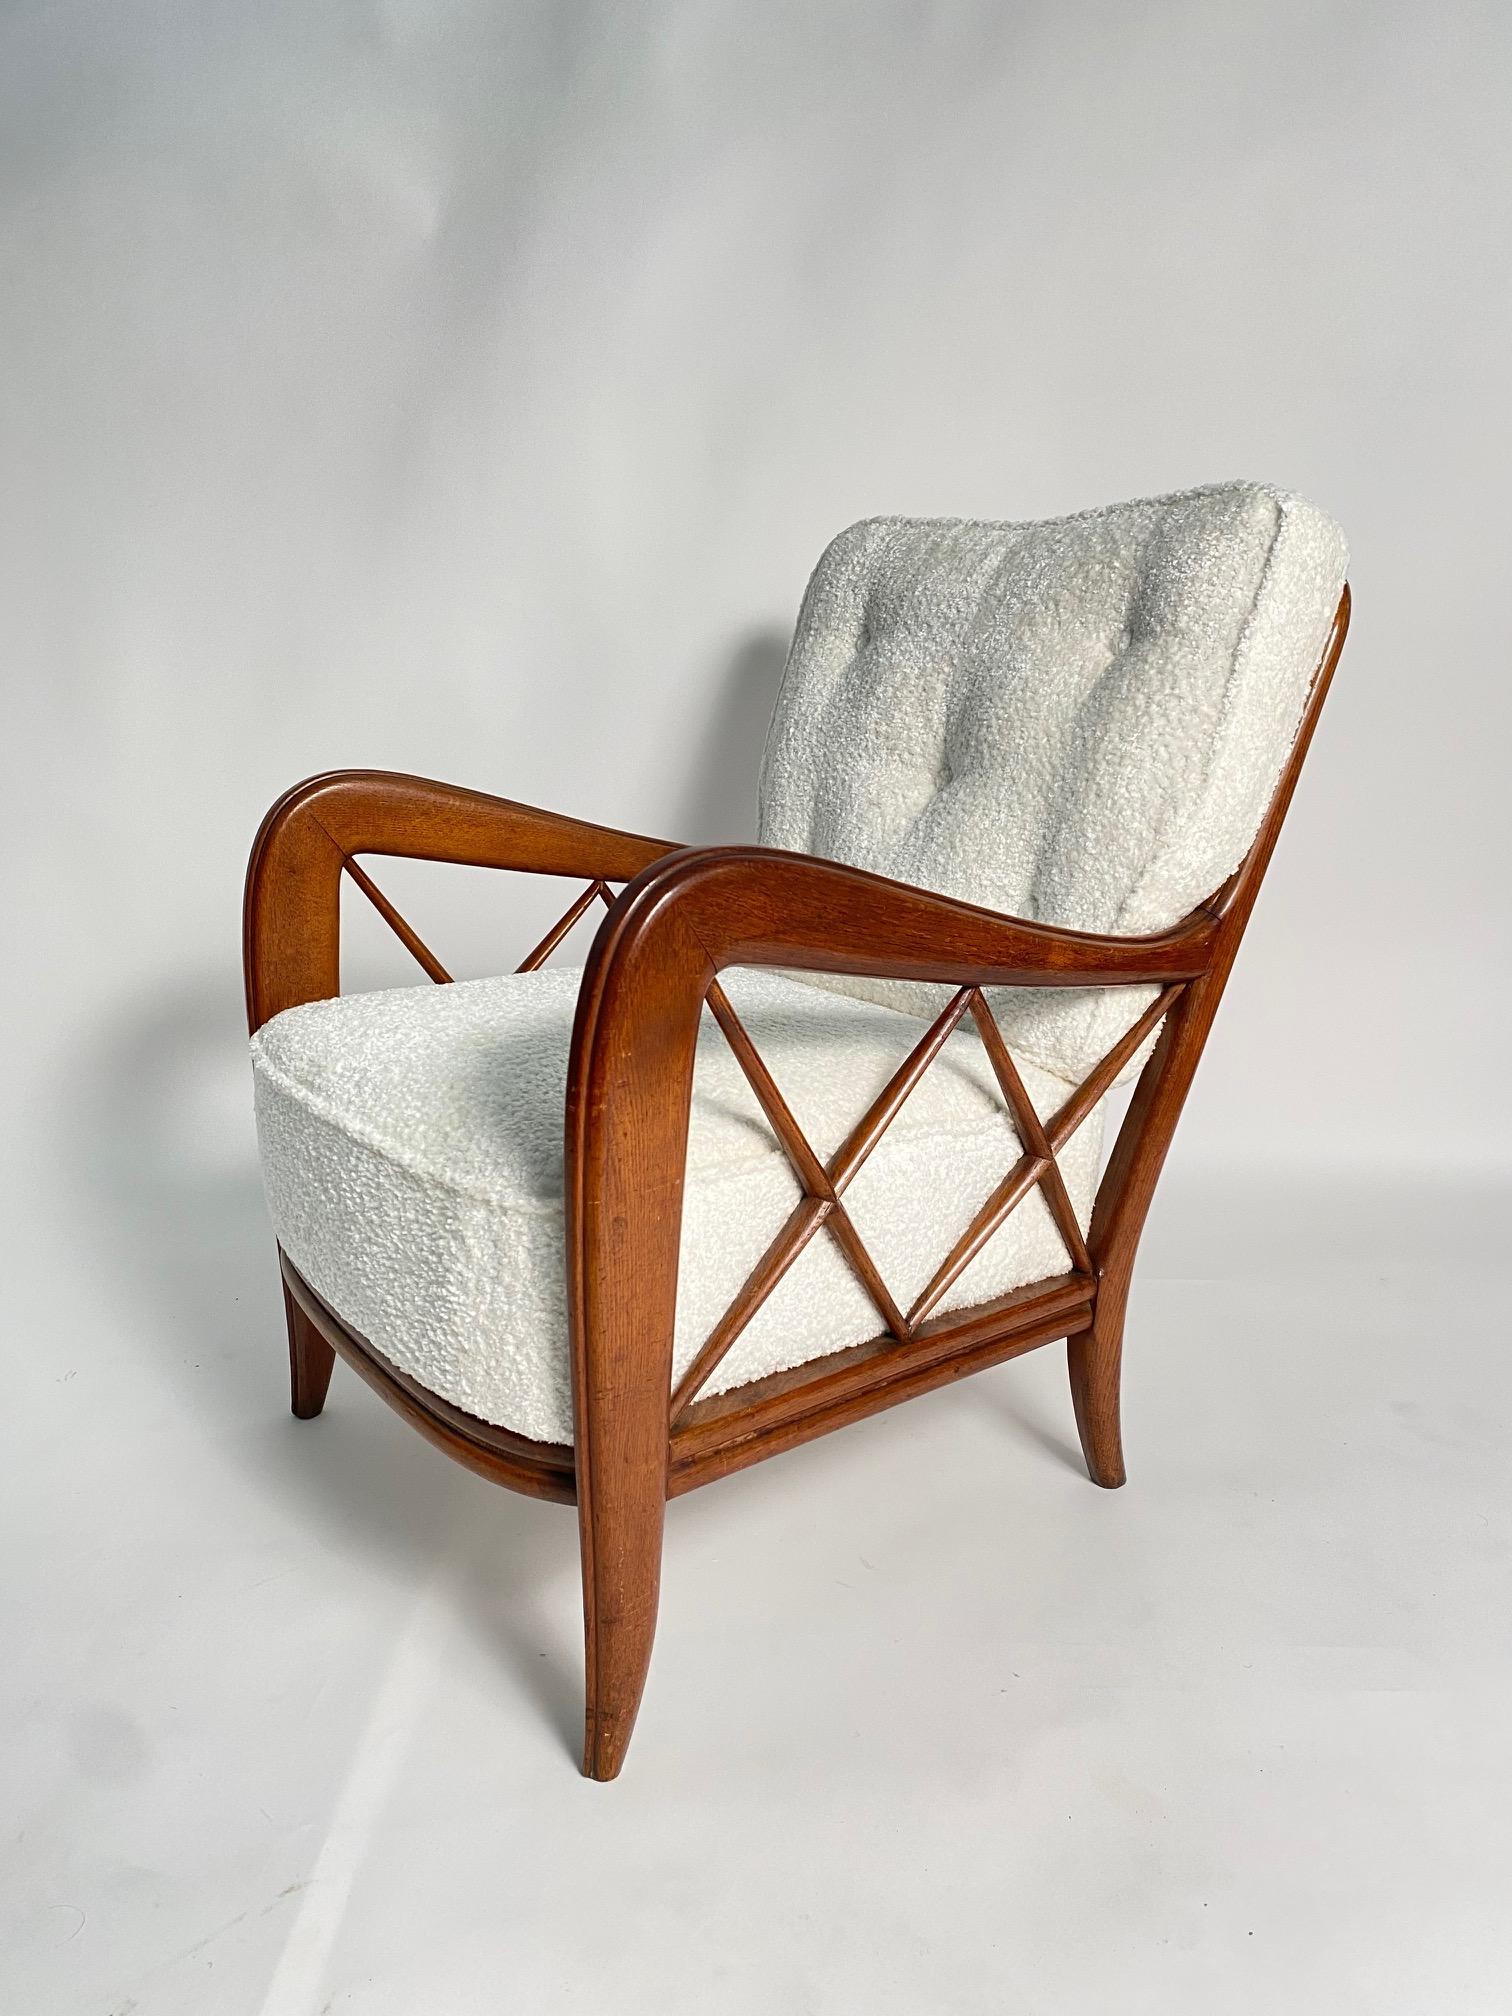 Pair of Mid-Century armchairs in the style of Paolo Buffa, Italy

This is a very elegant pair of 1950s Italian armchairs, polished solid wood structure and fabric cushions, an iconic and very refined shape that is well suited to different living